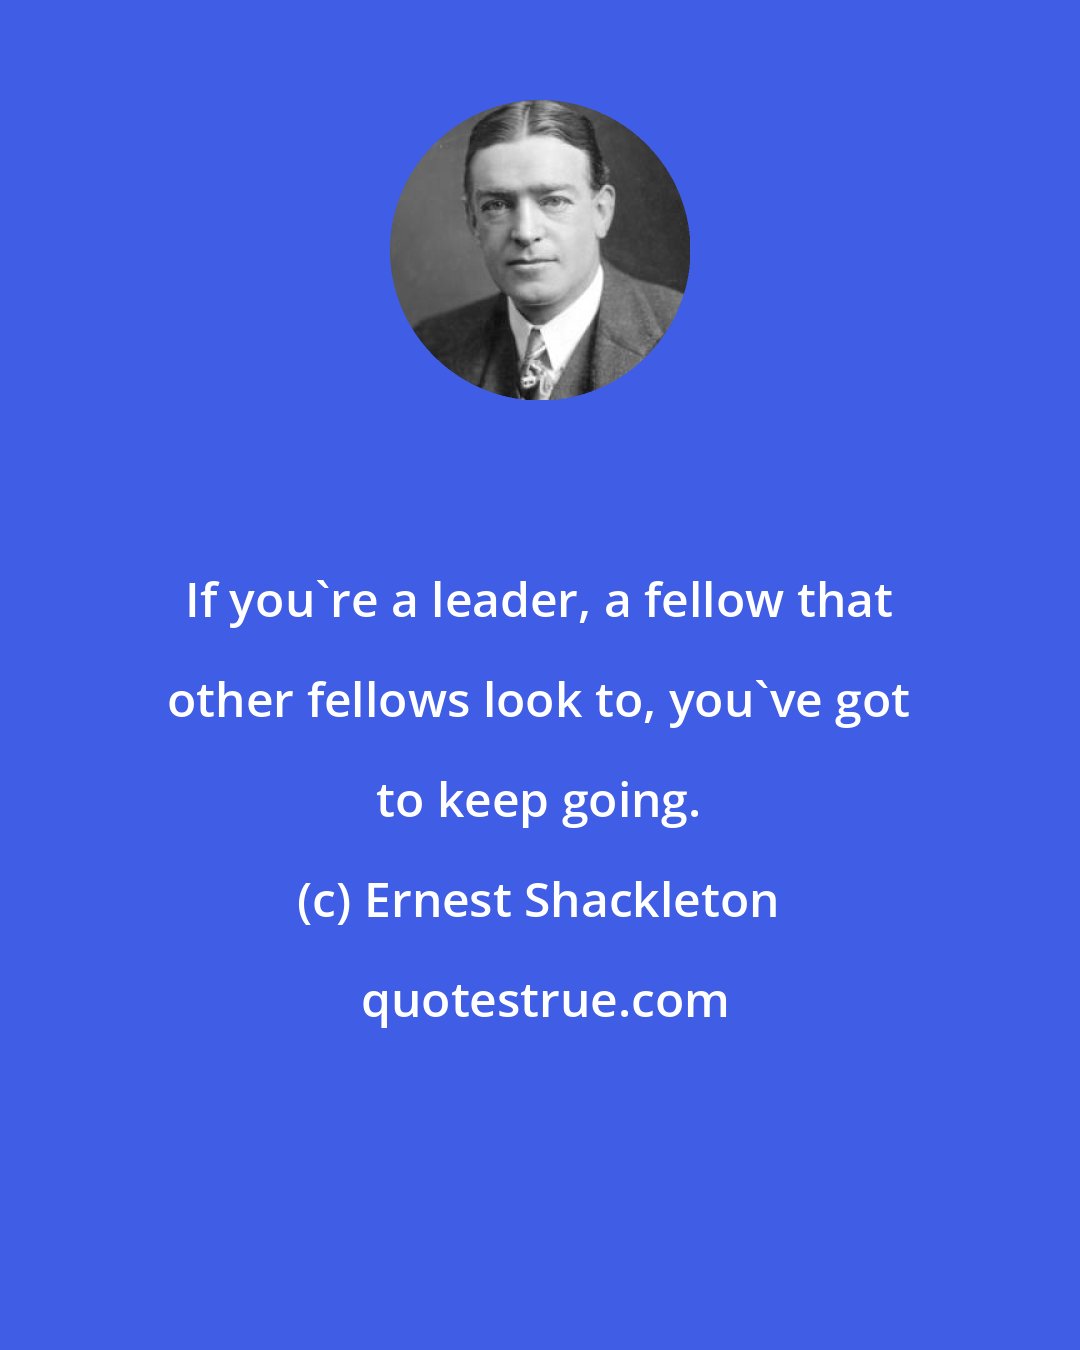 Ernest Shackleton: If you're a leader, a fellow that other fellows look to, you've got to keep going.